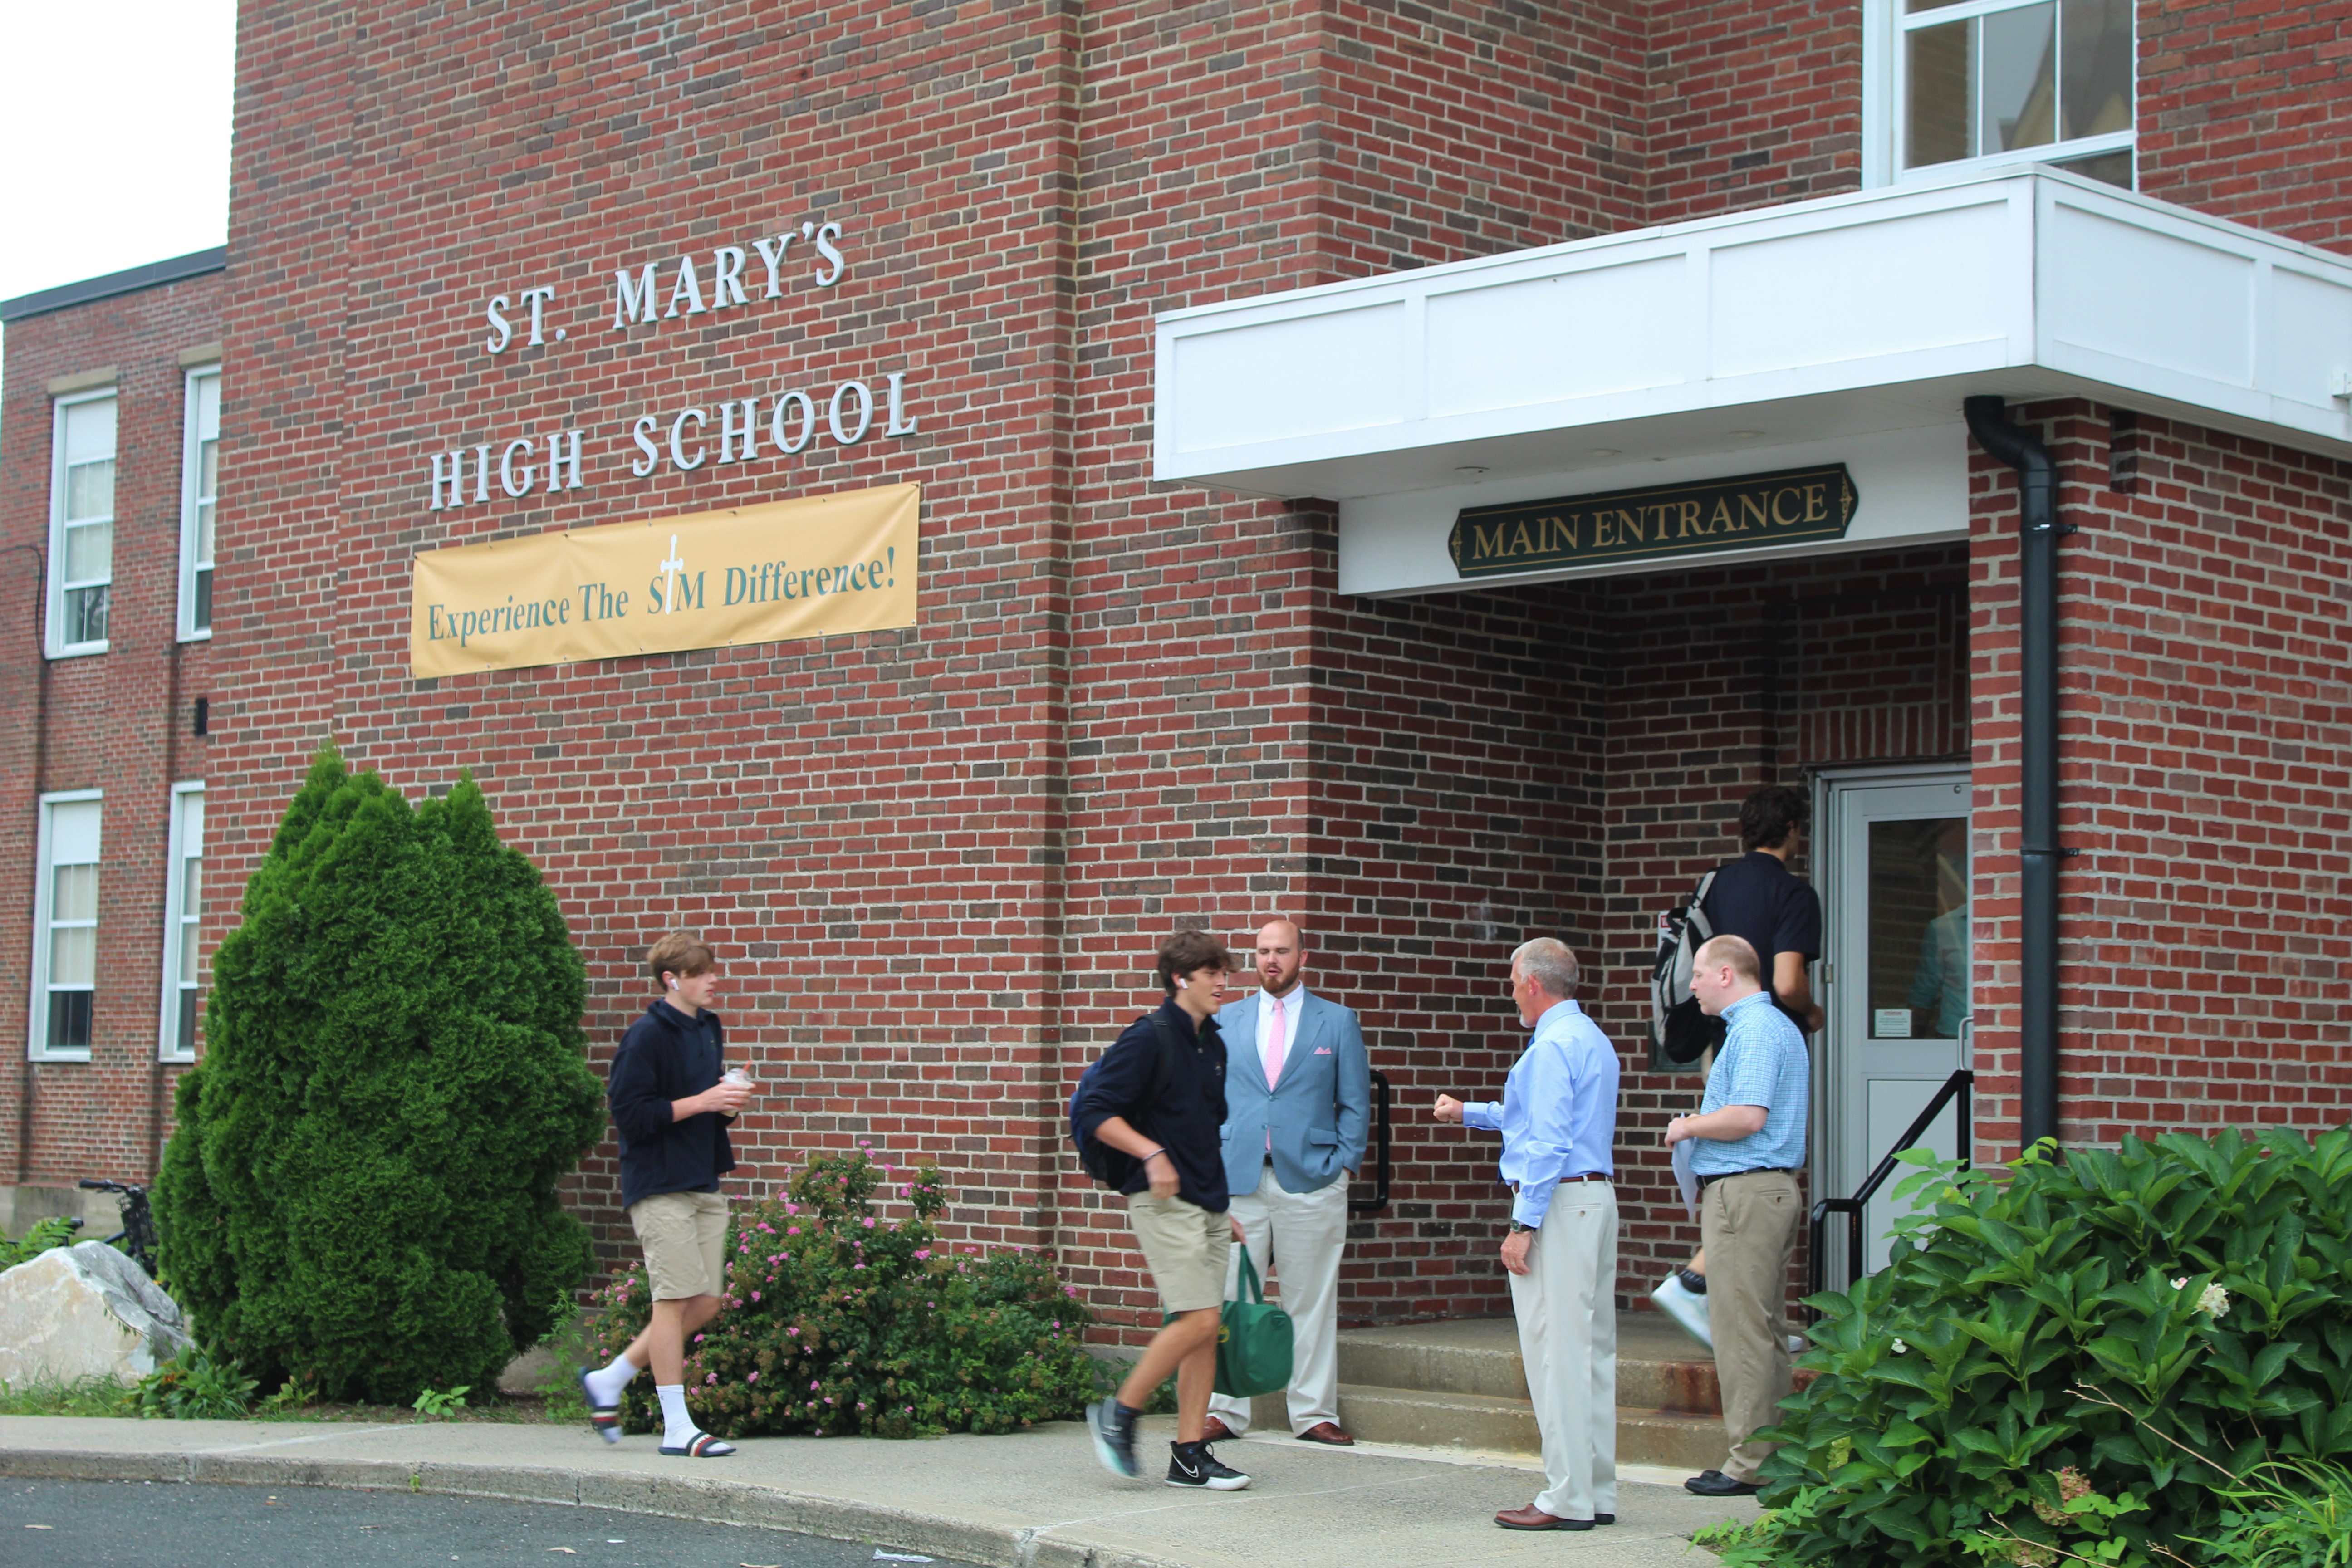 St. Mary's High School to close at end of 2022-2023 school year 